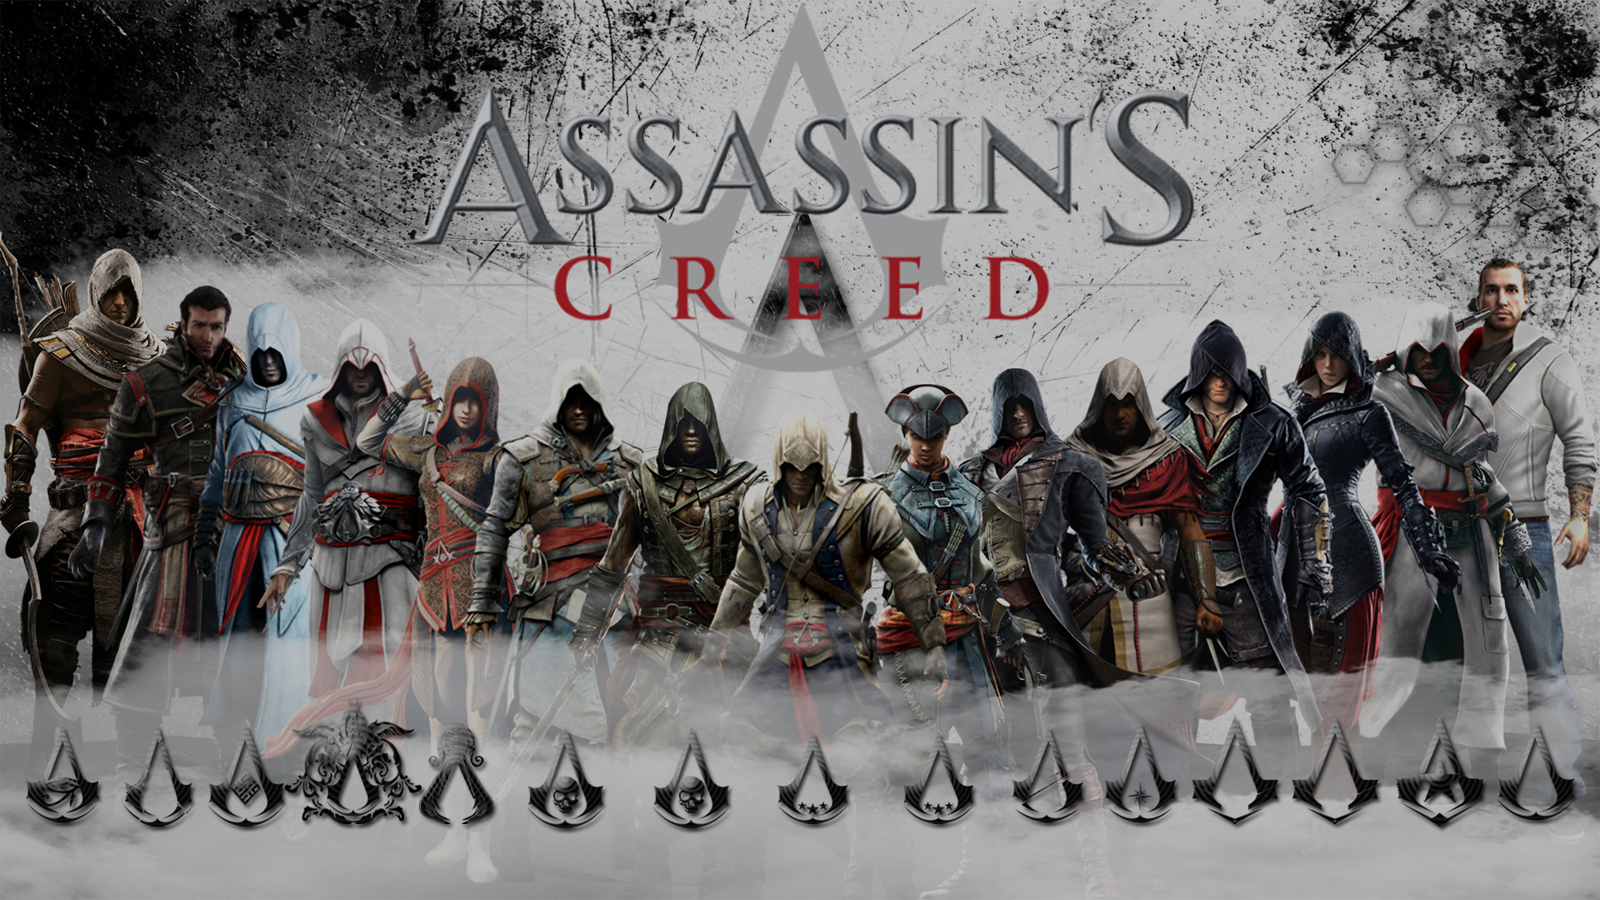 assassin's creed, connor (assassin's creed), shay cormac, video game, altair (assassin's creed), ezio (assassin's creed)